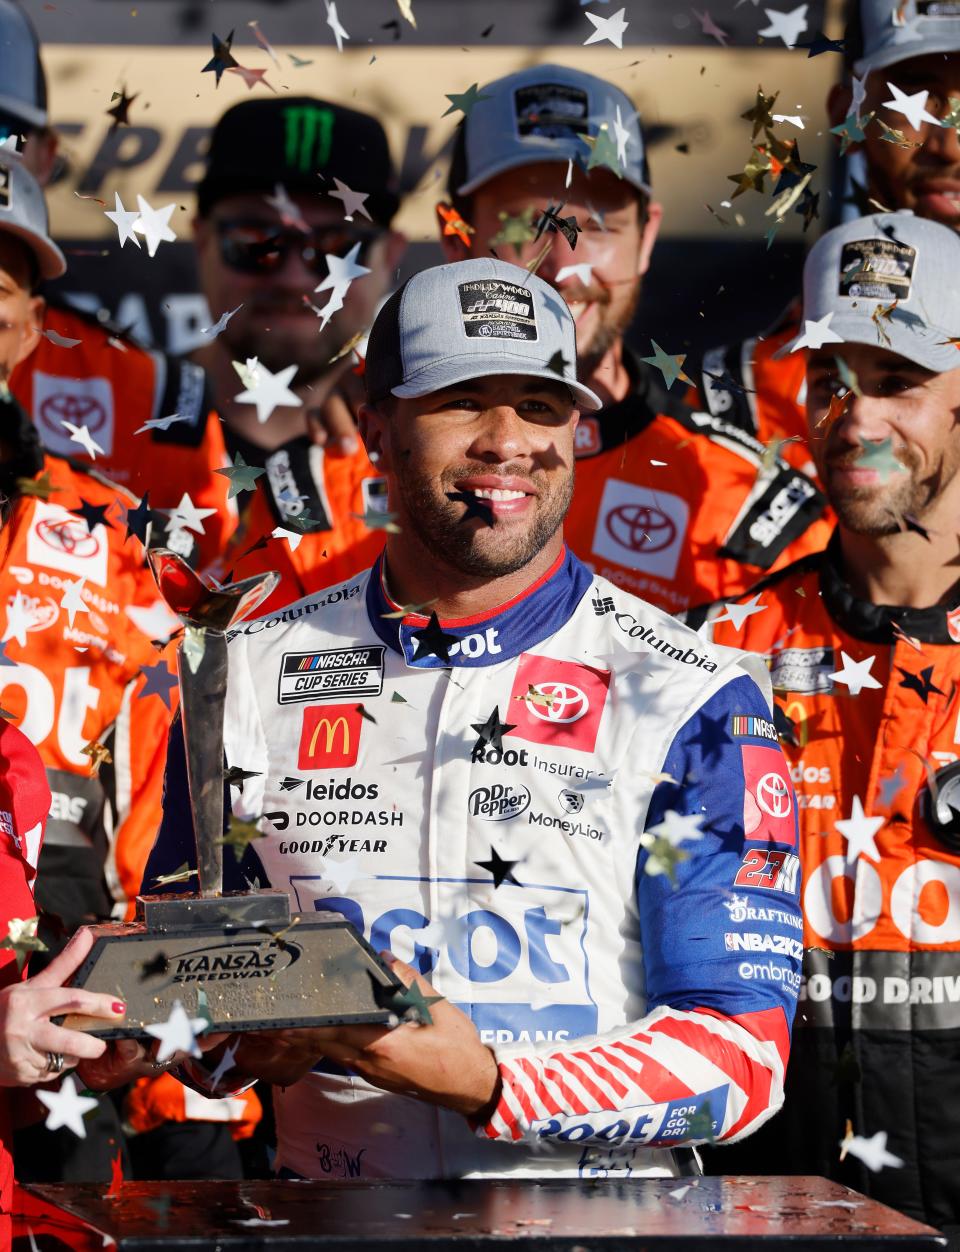 Bubba Wallace's win at Kansas last year may have been just a sign of things to come for 23XI Racing.